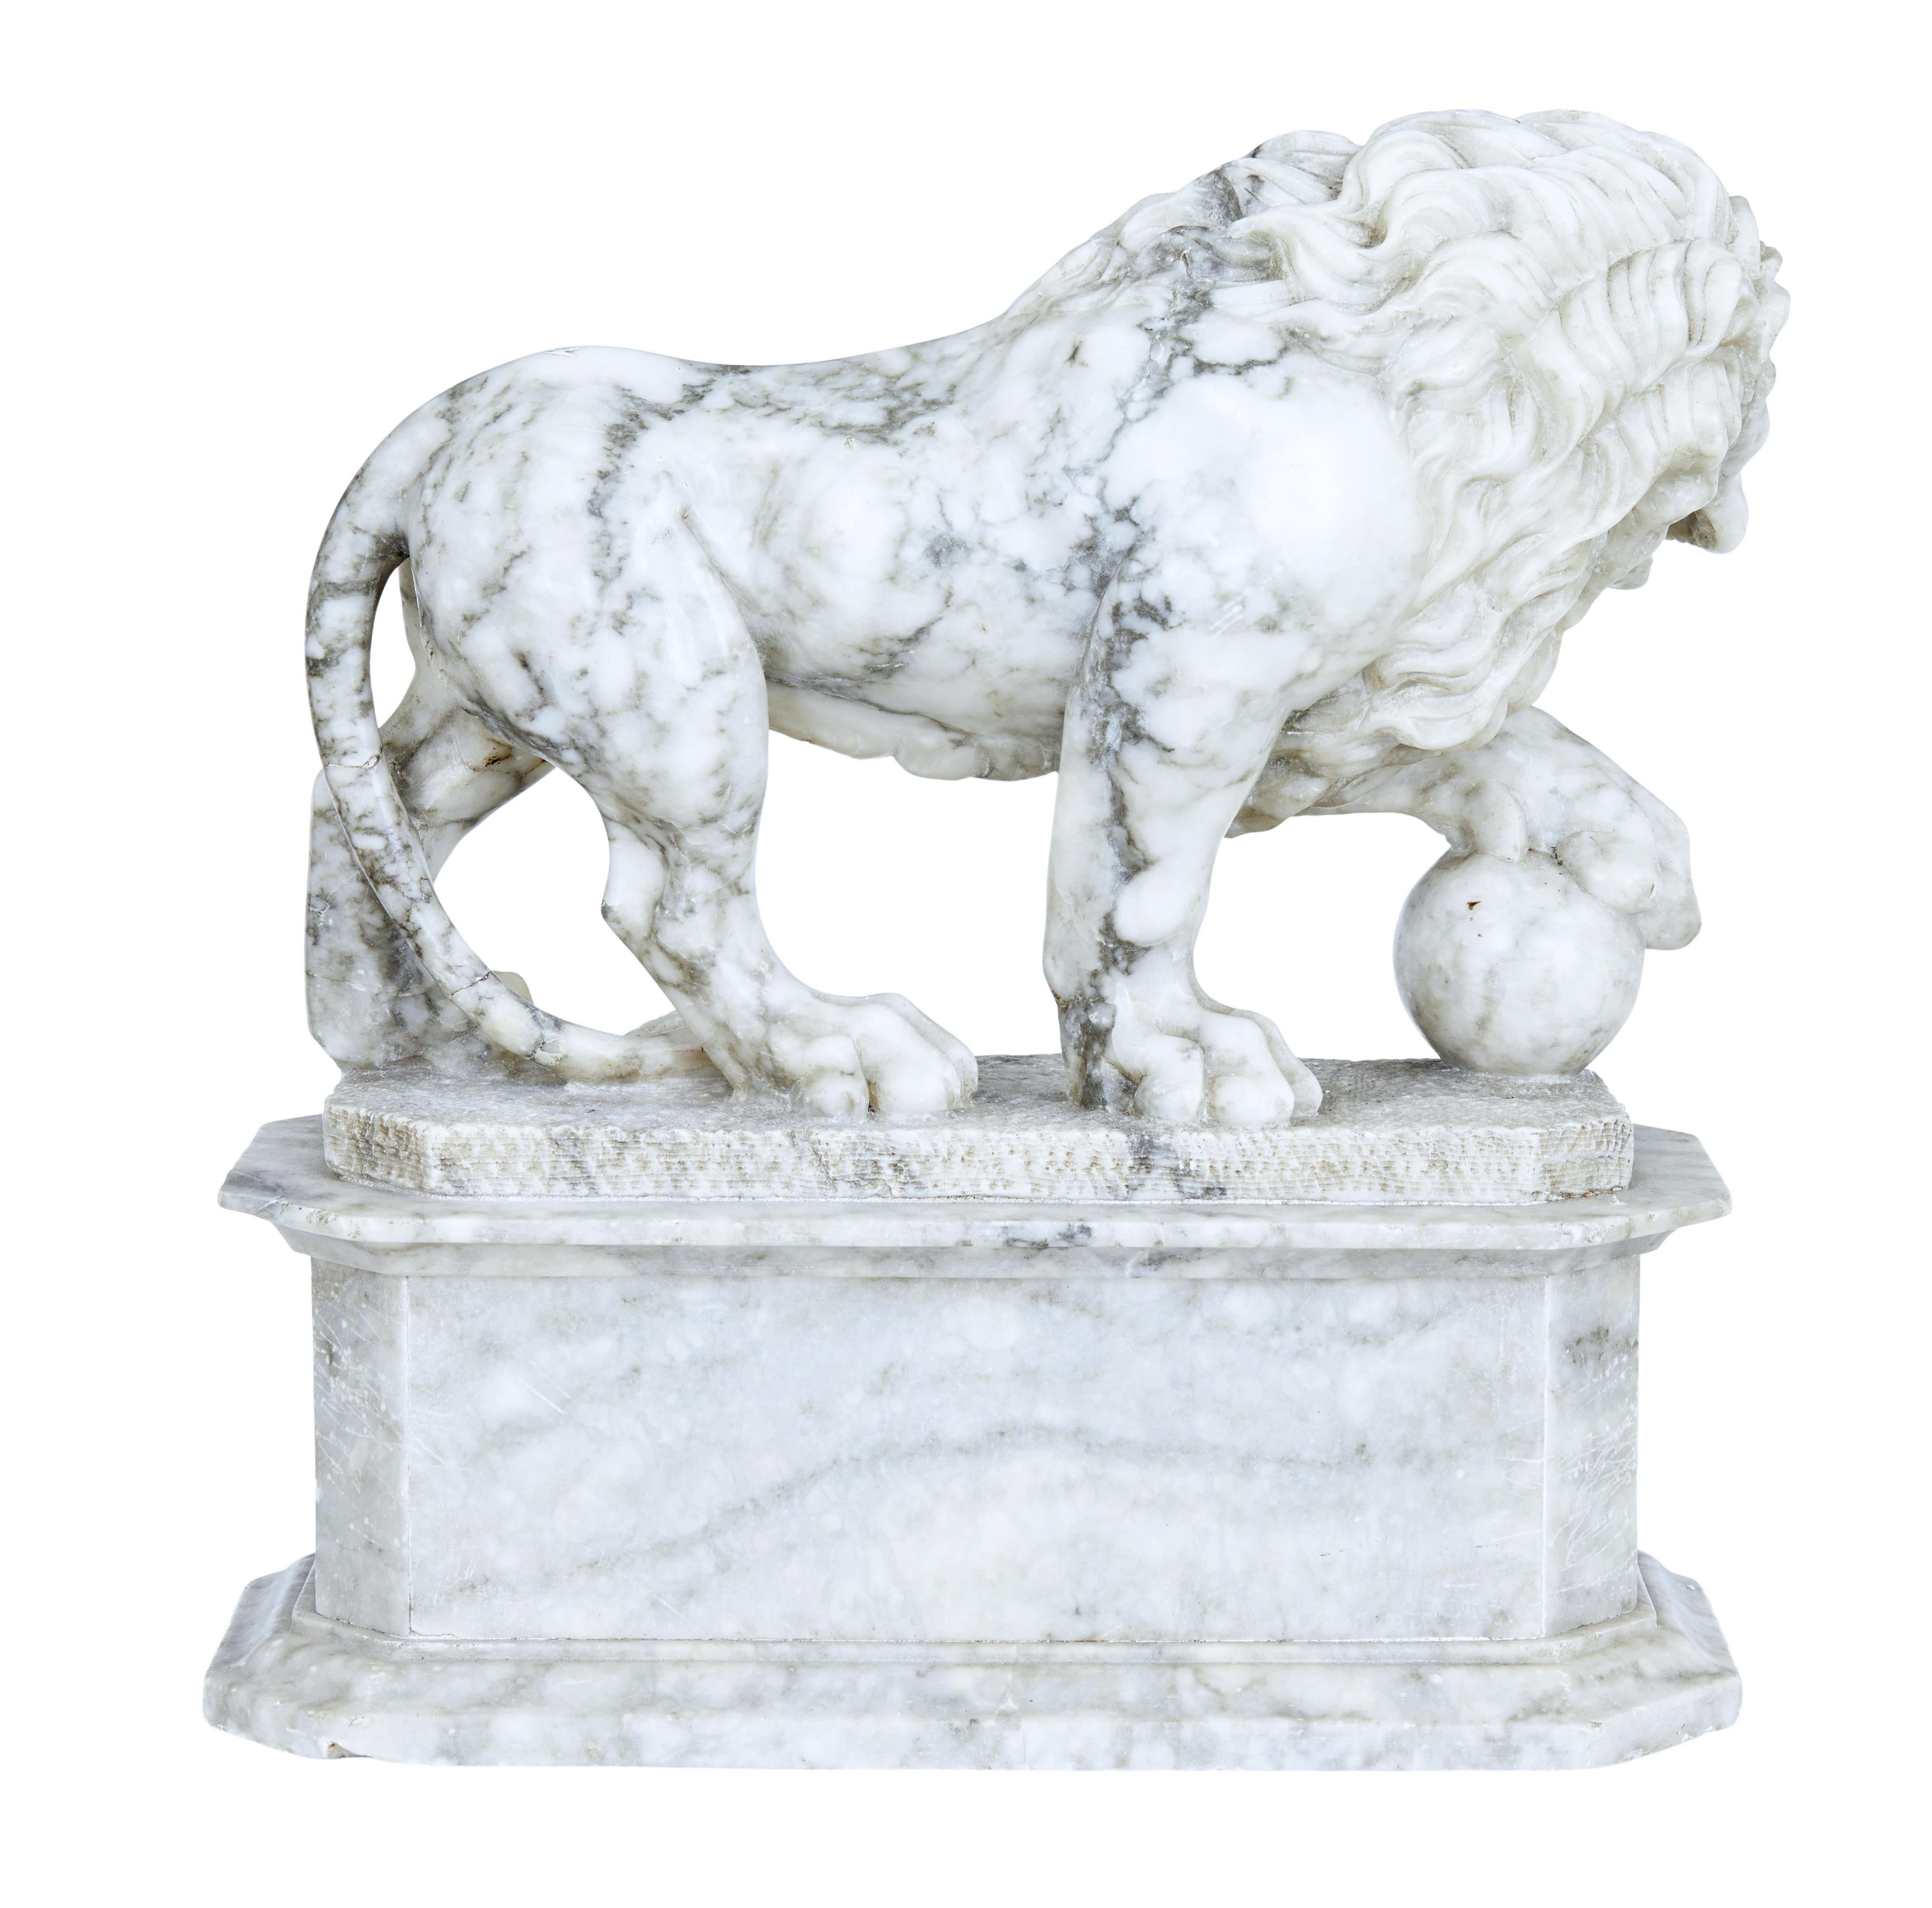 Hand-Carved Mid-19th Century Italian Marble Statue of a Lion